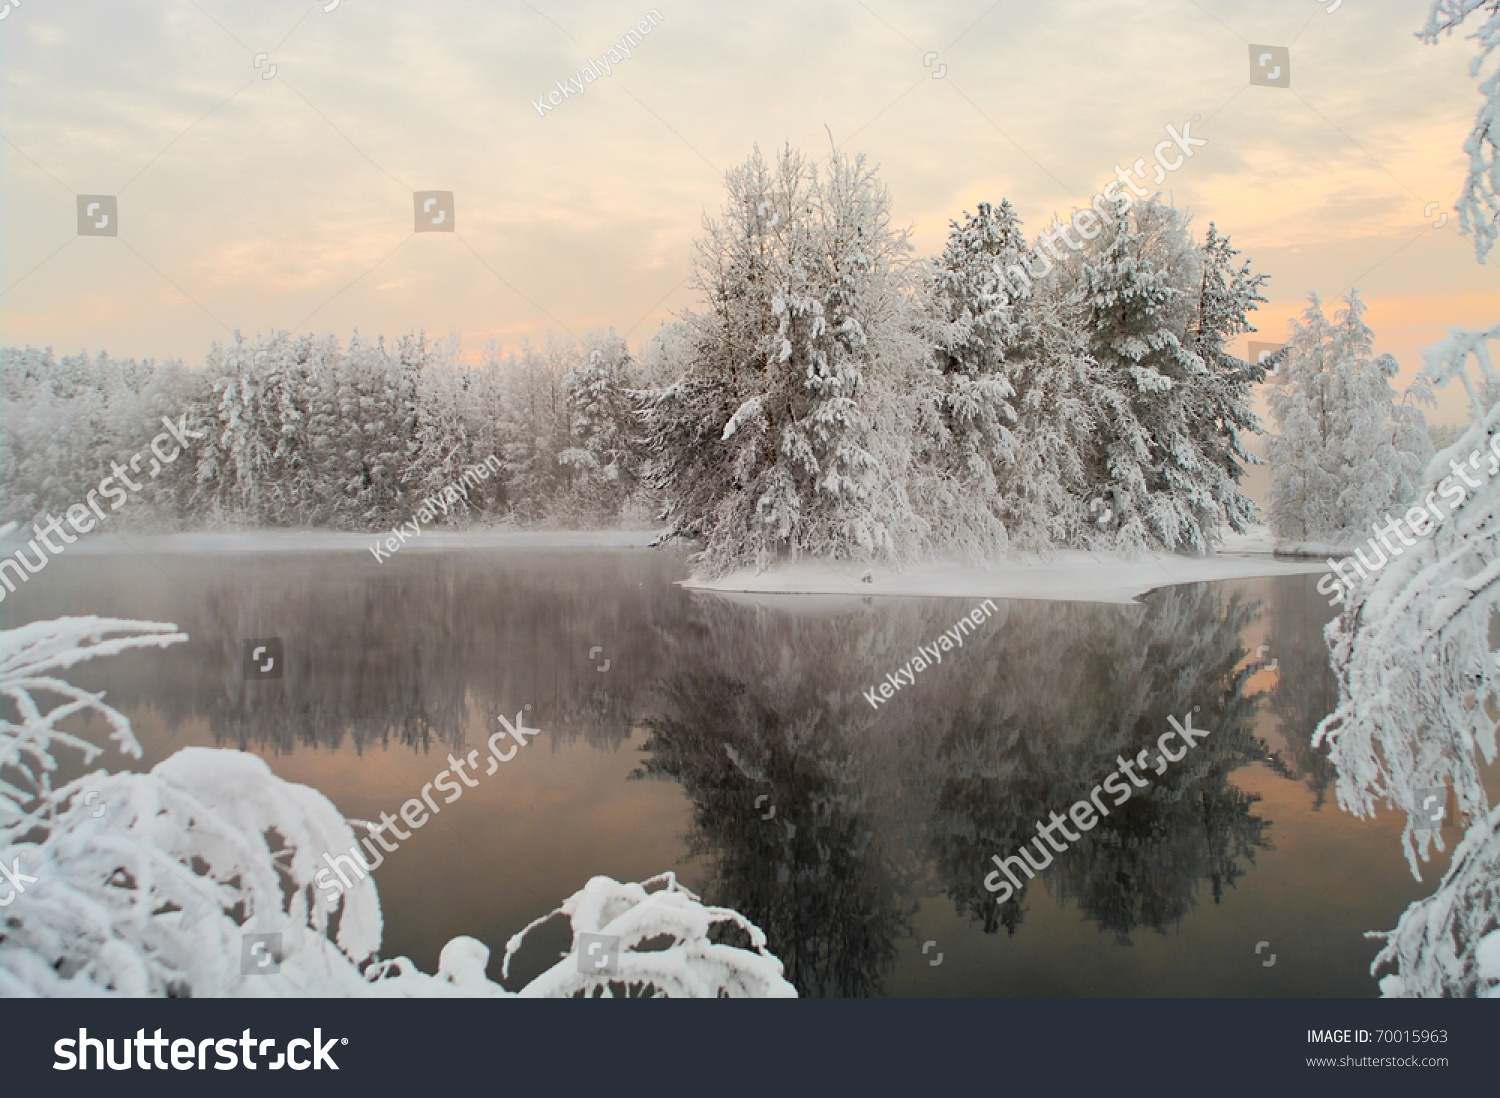 Unfrozen lake in the winter forests of Karelia, Russia. Black water and snowy brunches #70015963